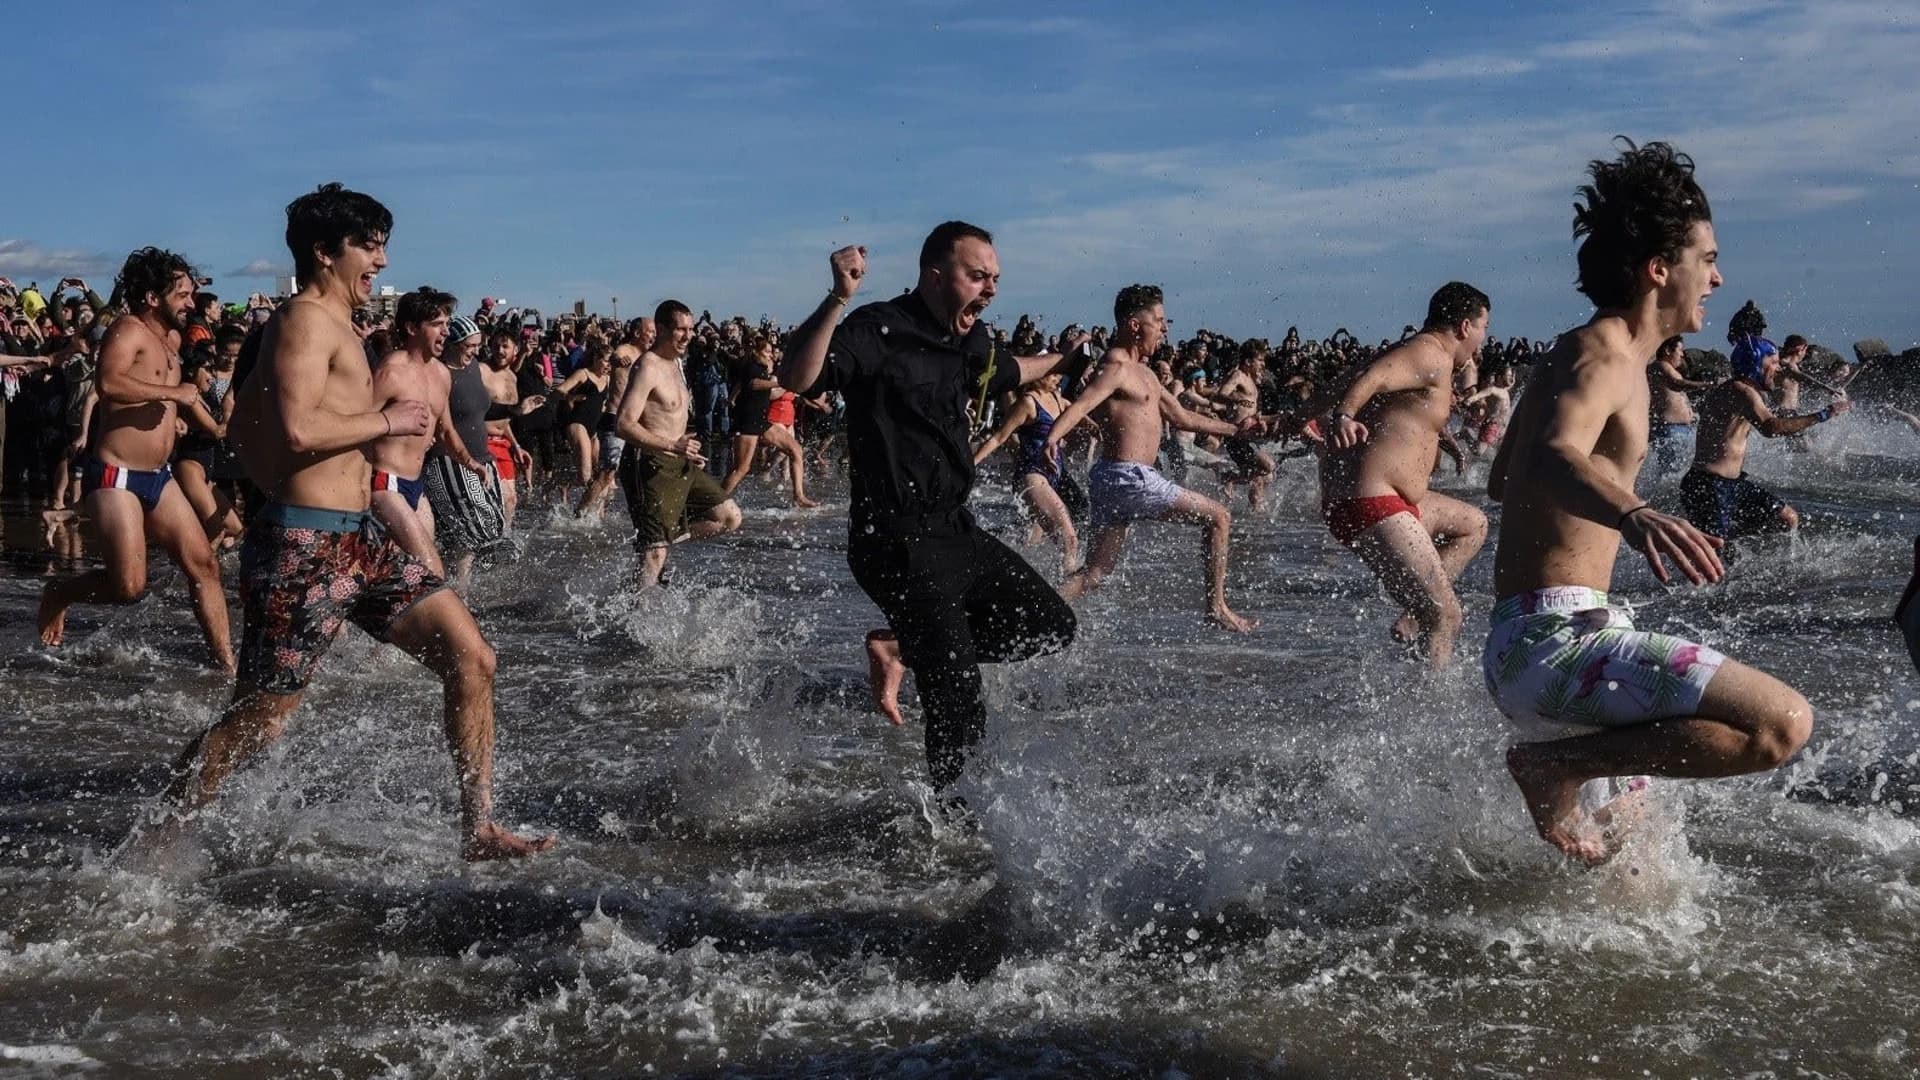 Day at the beach: Scores take wintry dip for Coney Island Polar Bear Plunge